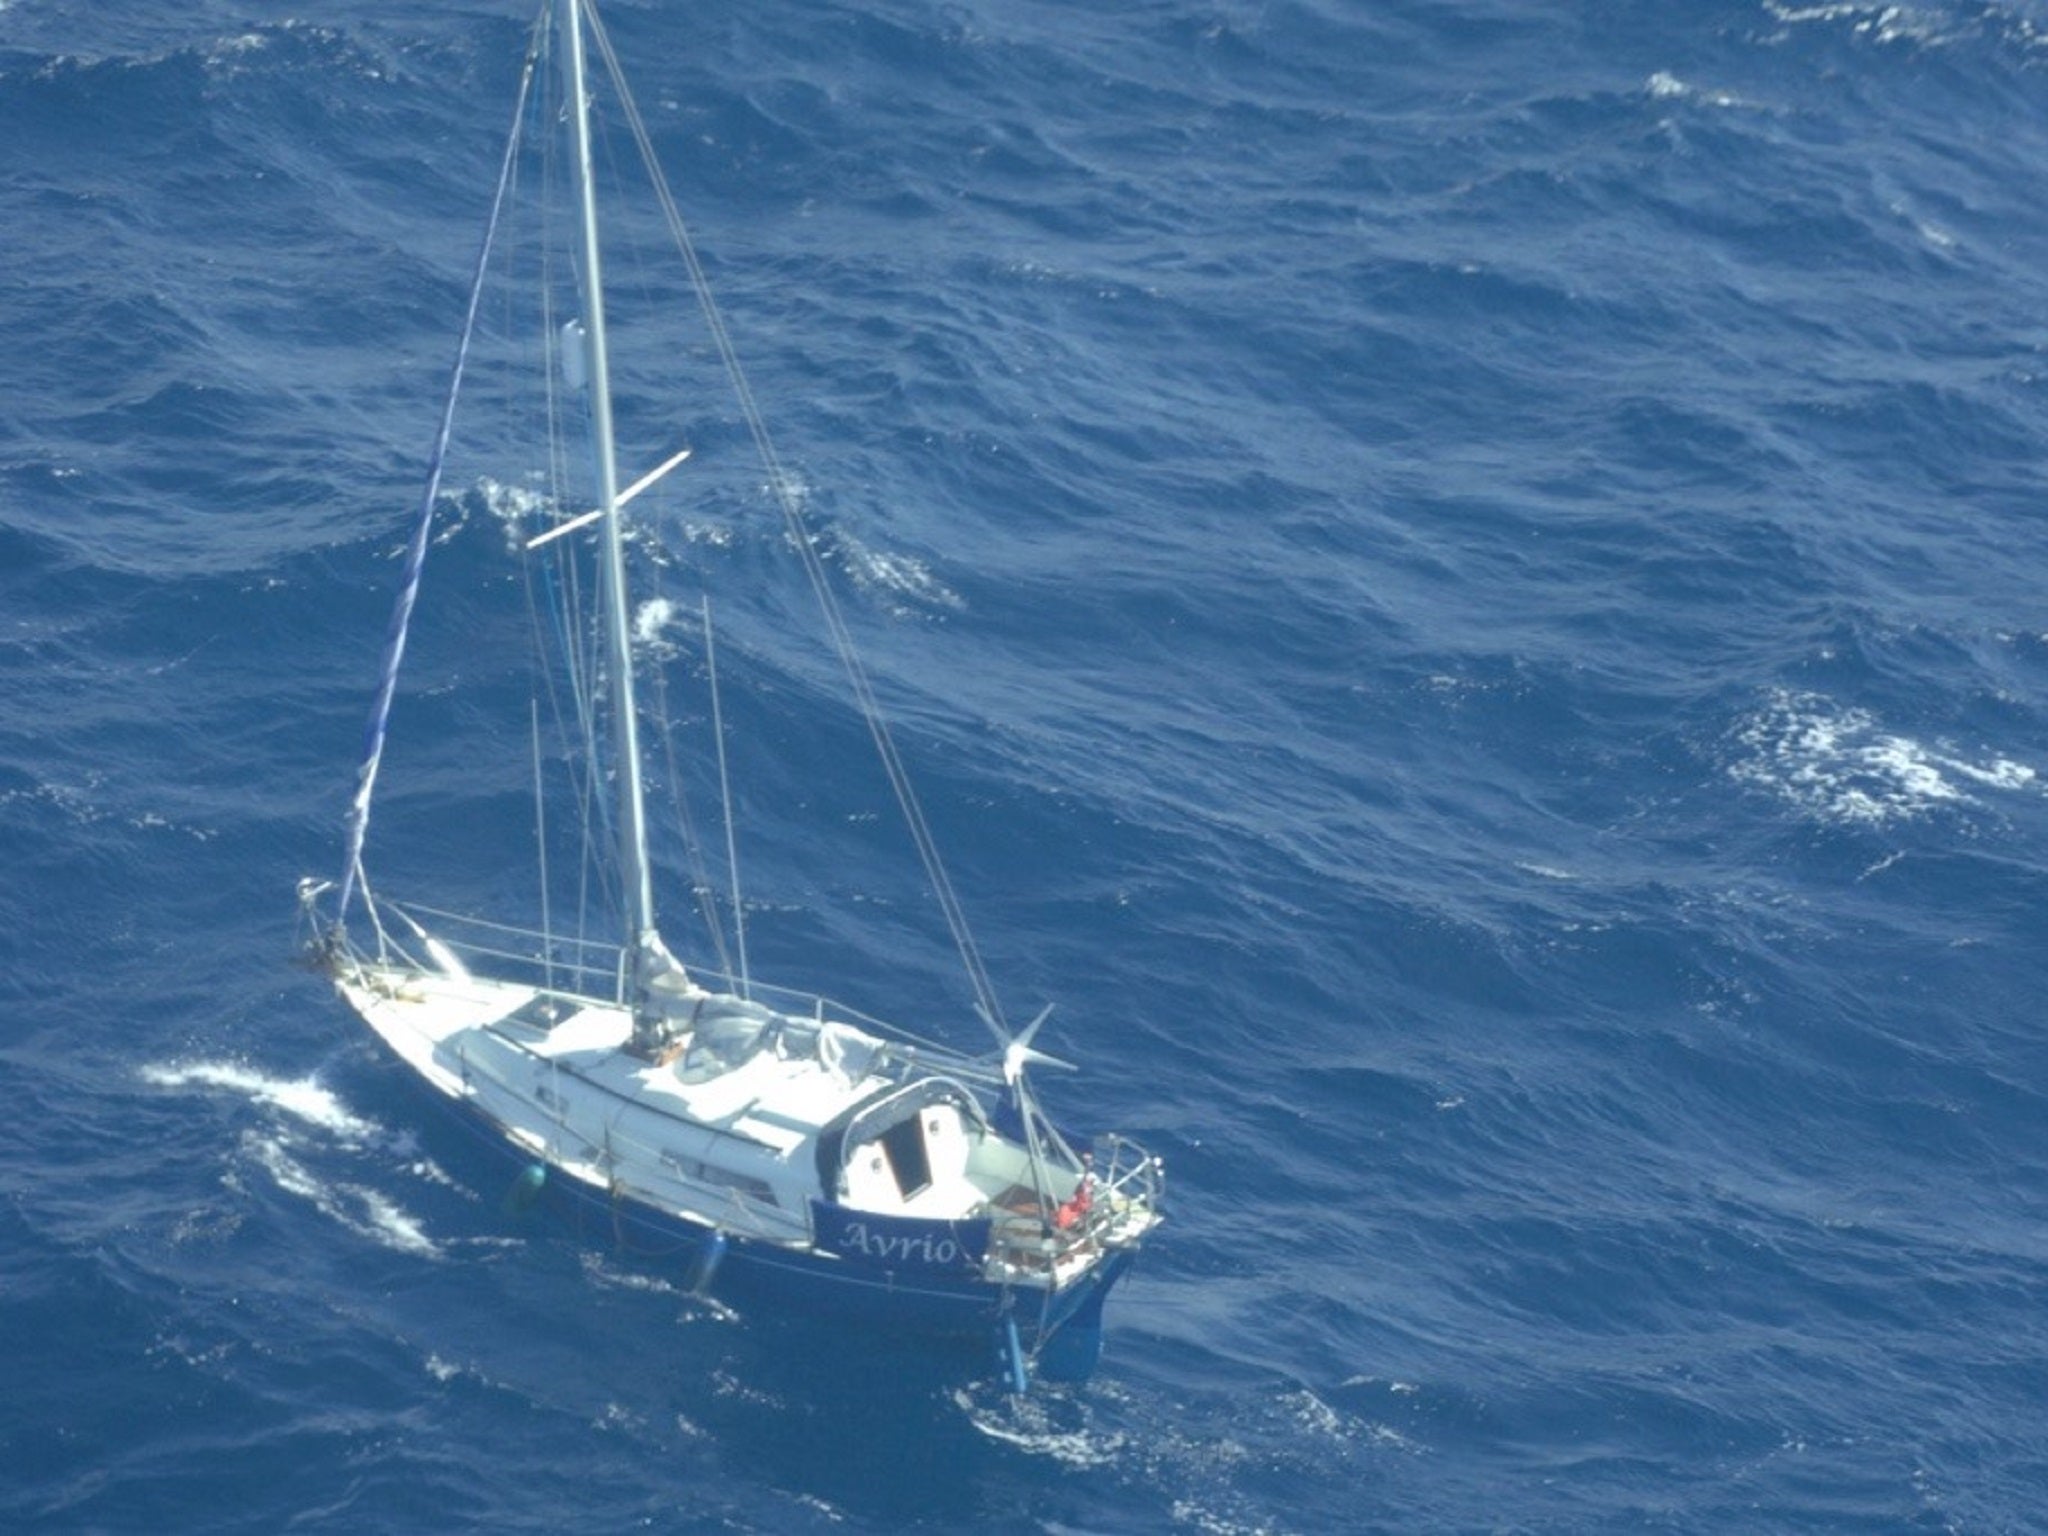 Jamaica Boat Group Sex - Missing 'inexperienced' sailor found dead in yacht off Jamaica after  crossing Atlantic | The Independent | The Independent